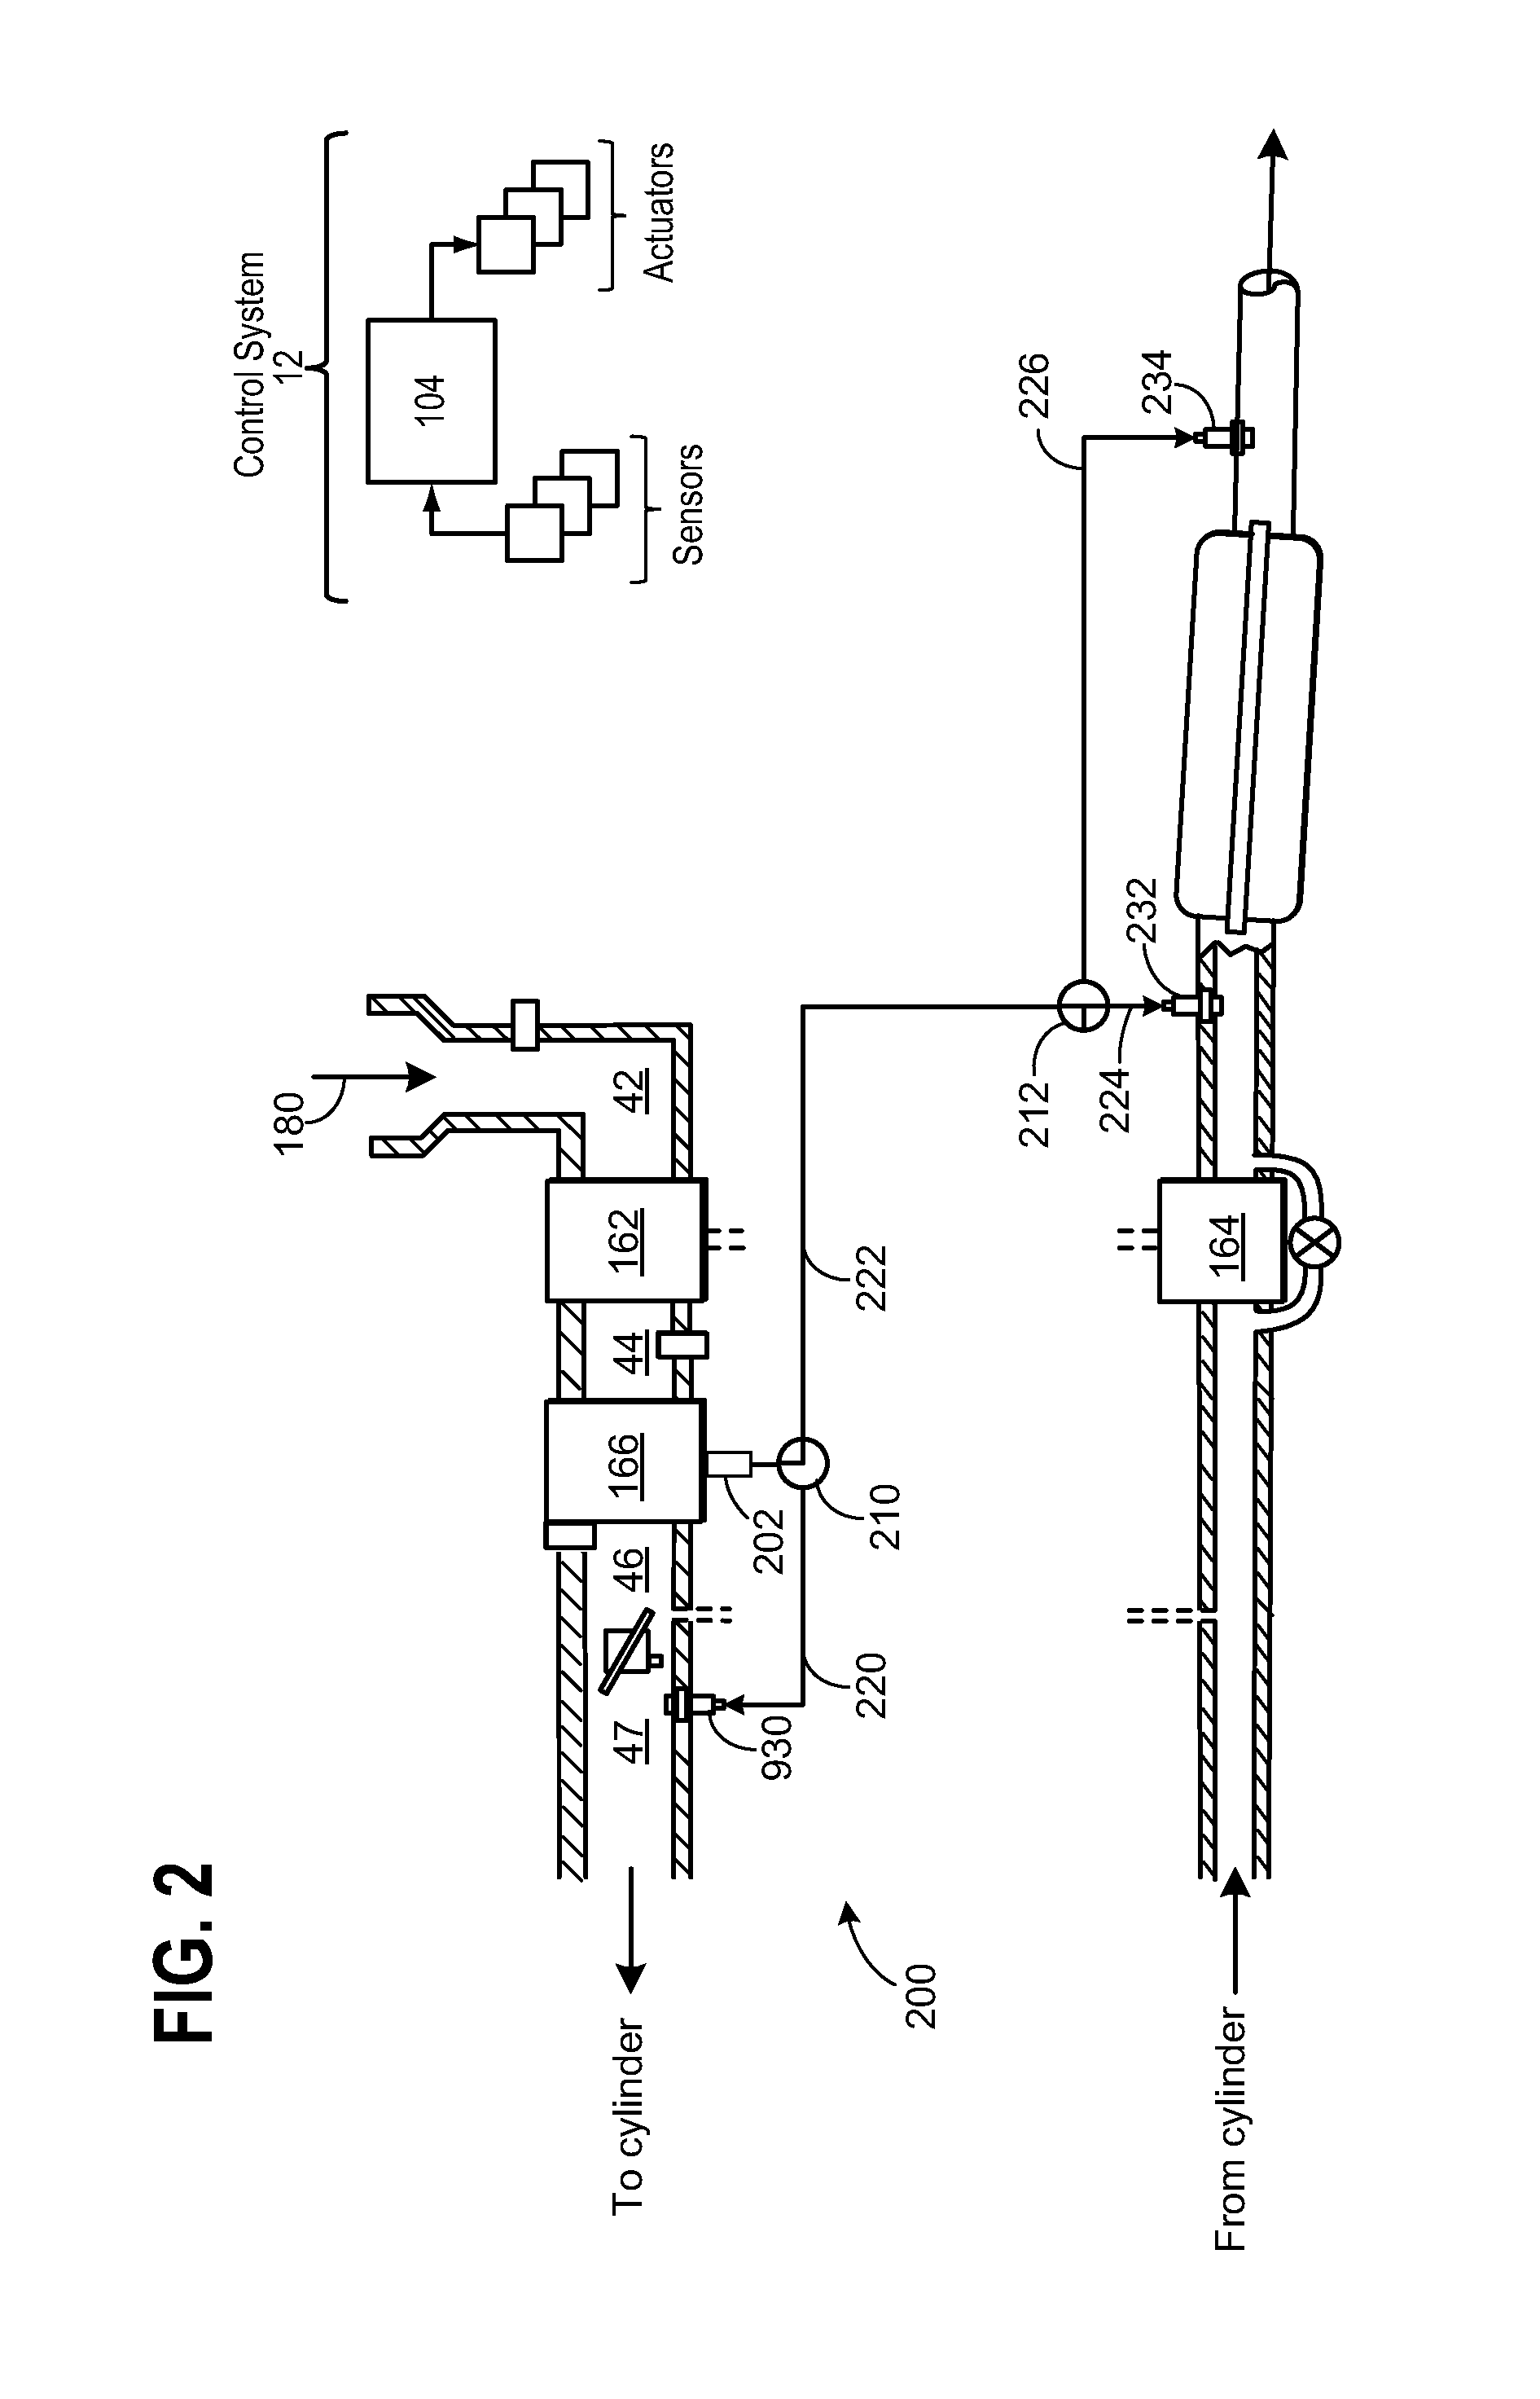 System and methods for engine air path condensation management